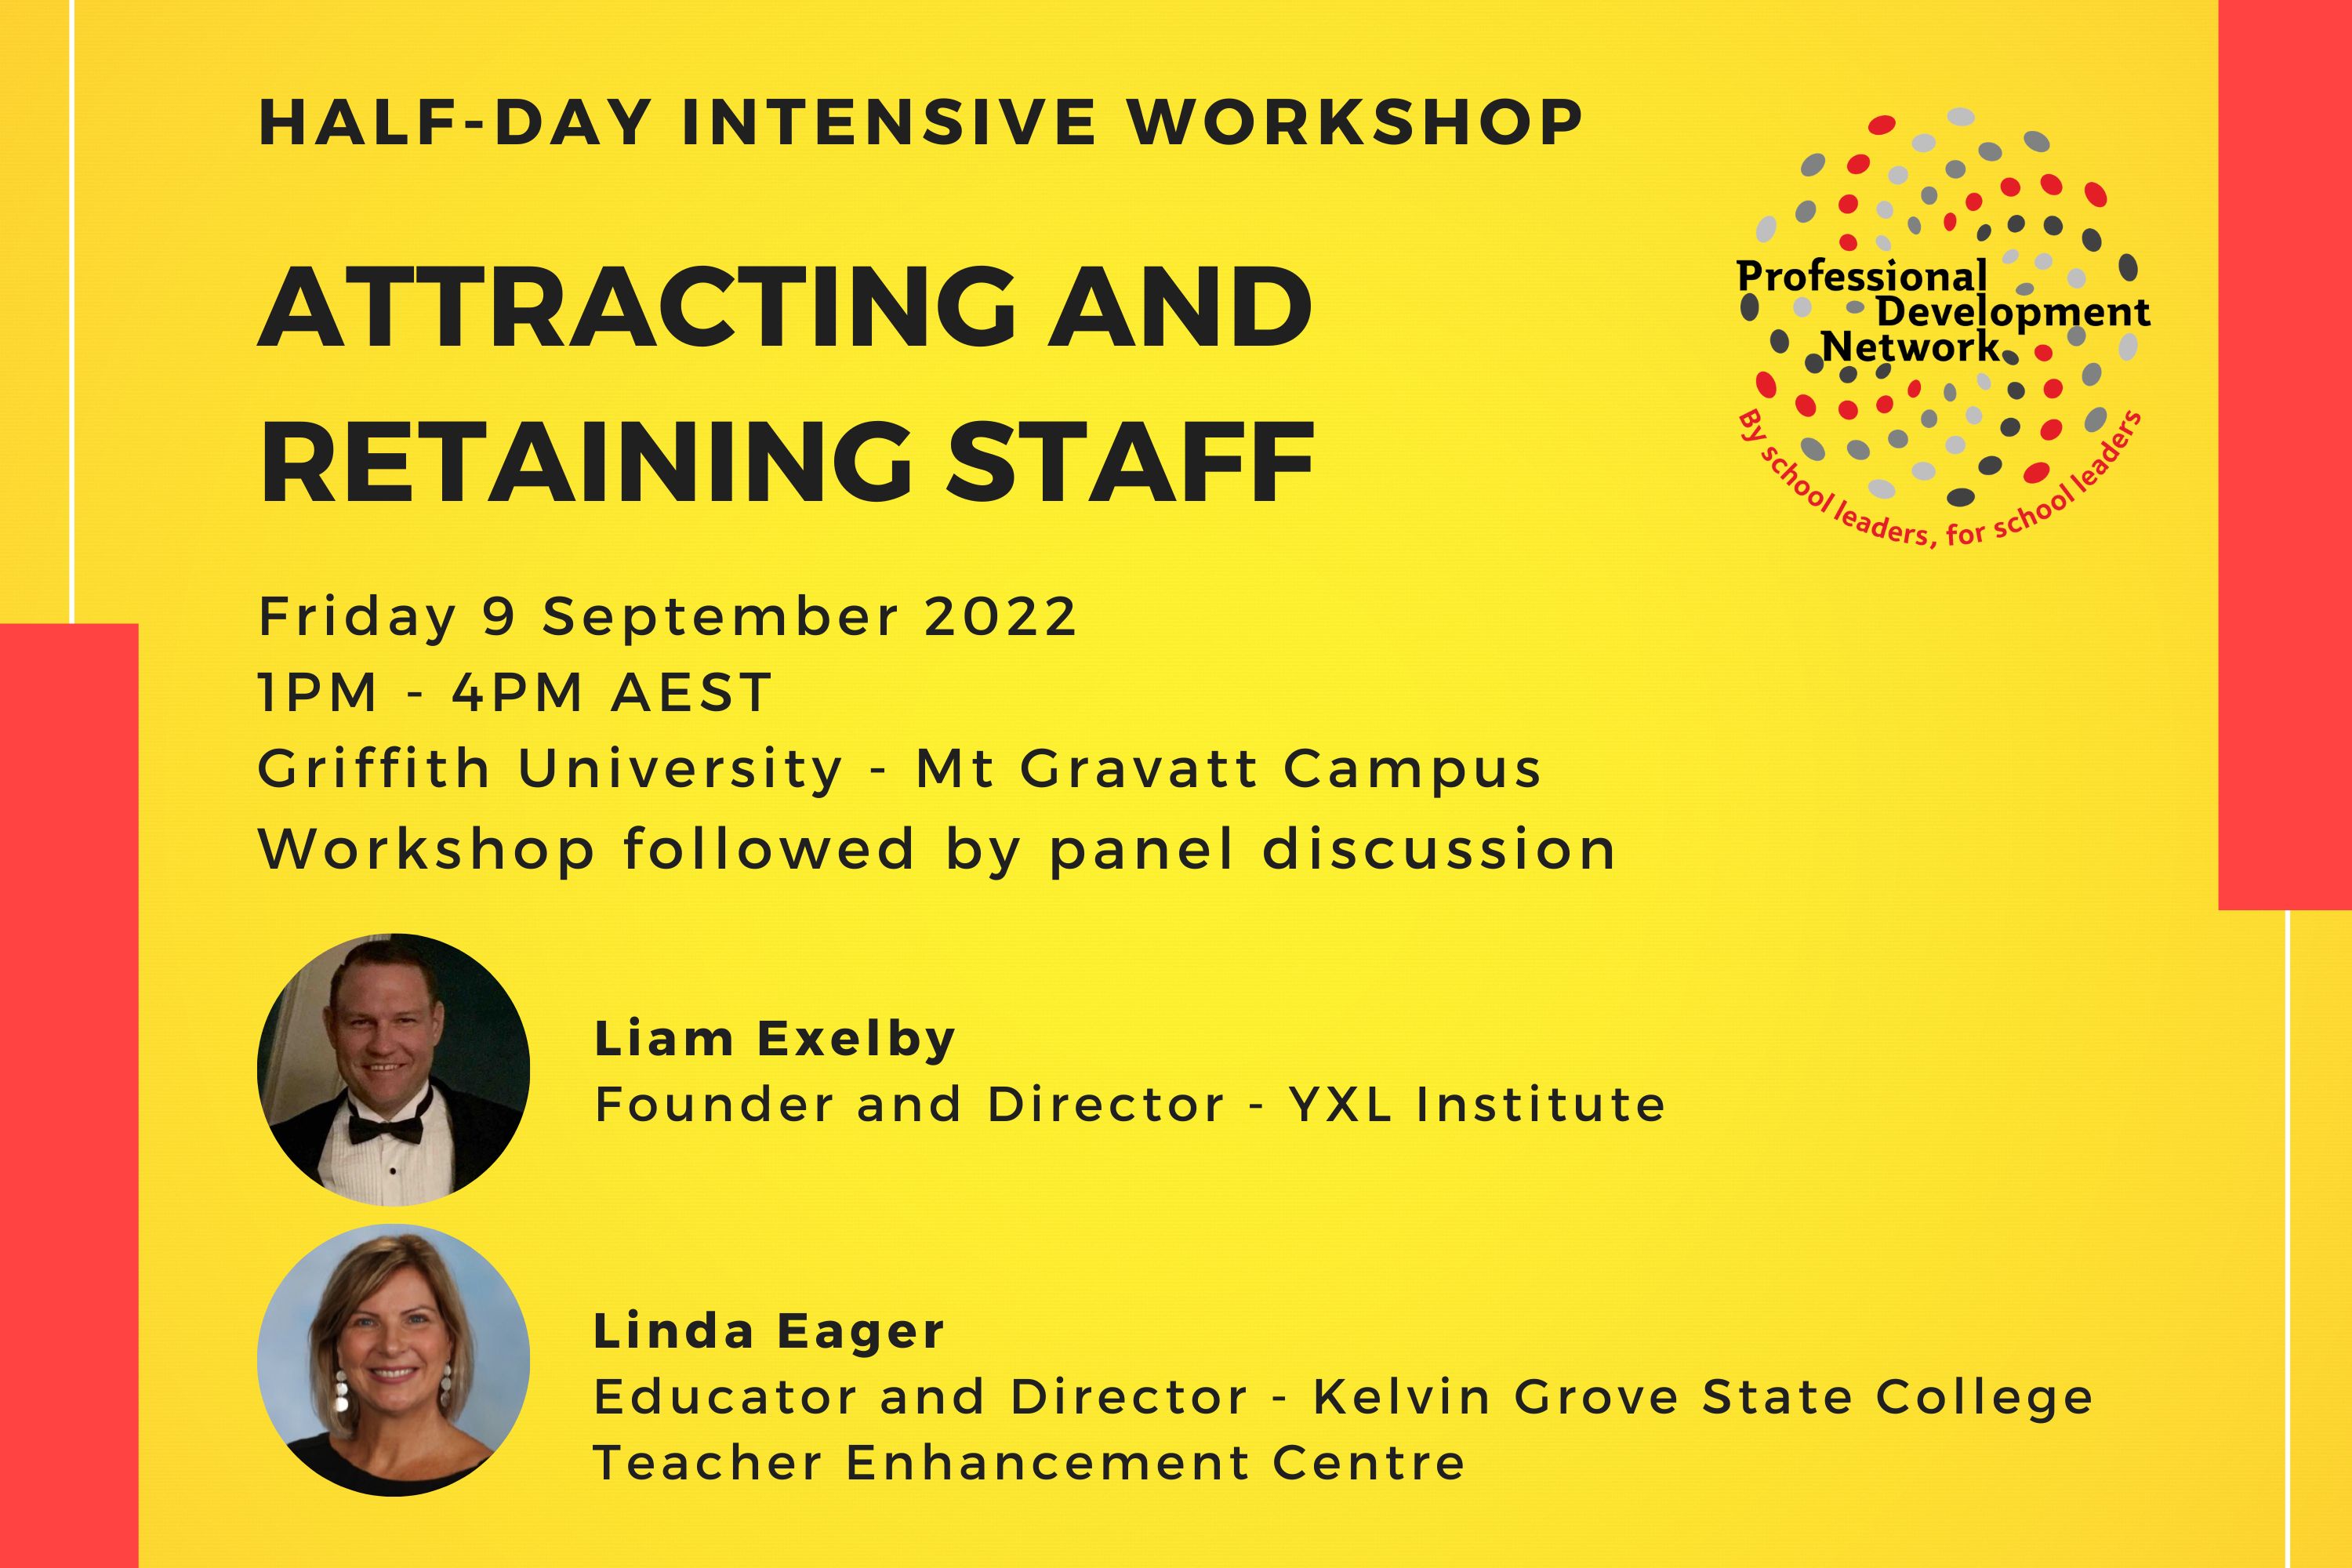 Attracting and Retaining Staff - PDN Half-Day Intensive Workshop and Panel Discussion